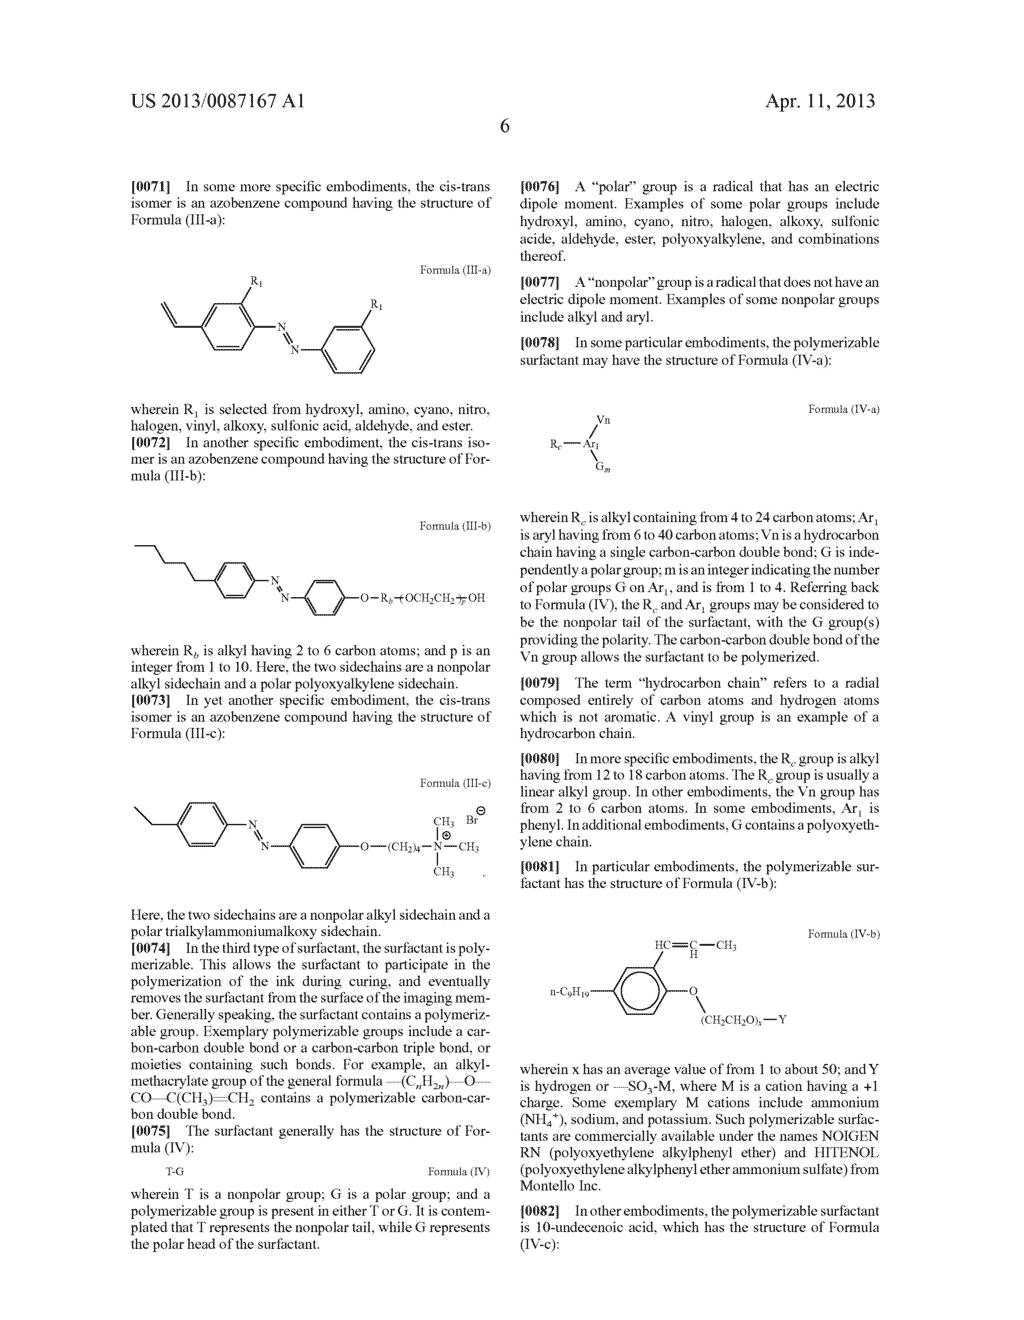 TUNABLE SURFACTANTS IN DAMPENING FLUIDS FOR DIGITAL OFFSET INK PRINTING     APPLICATIONS - diagram, schematic, and image 09